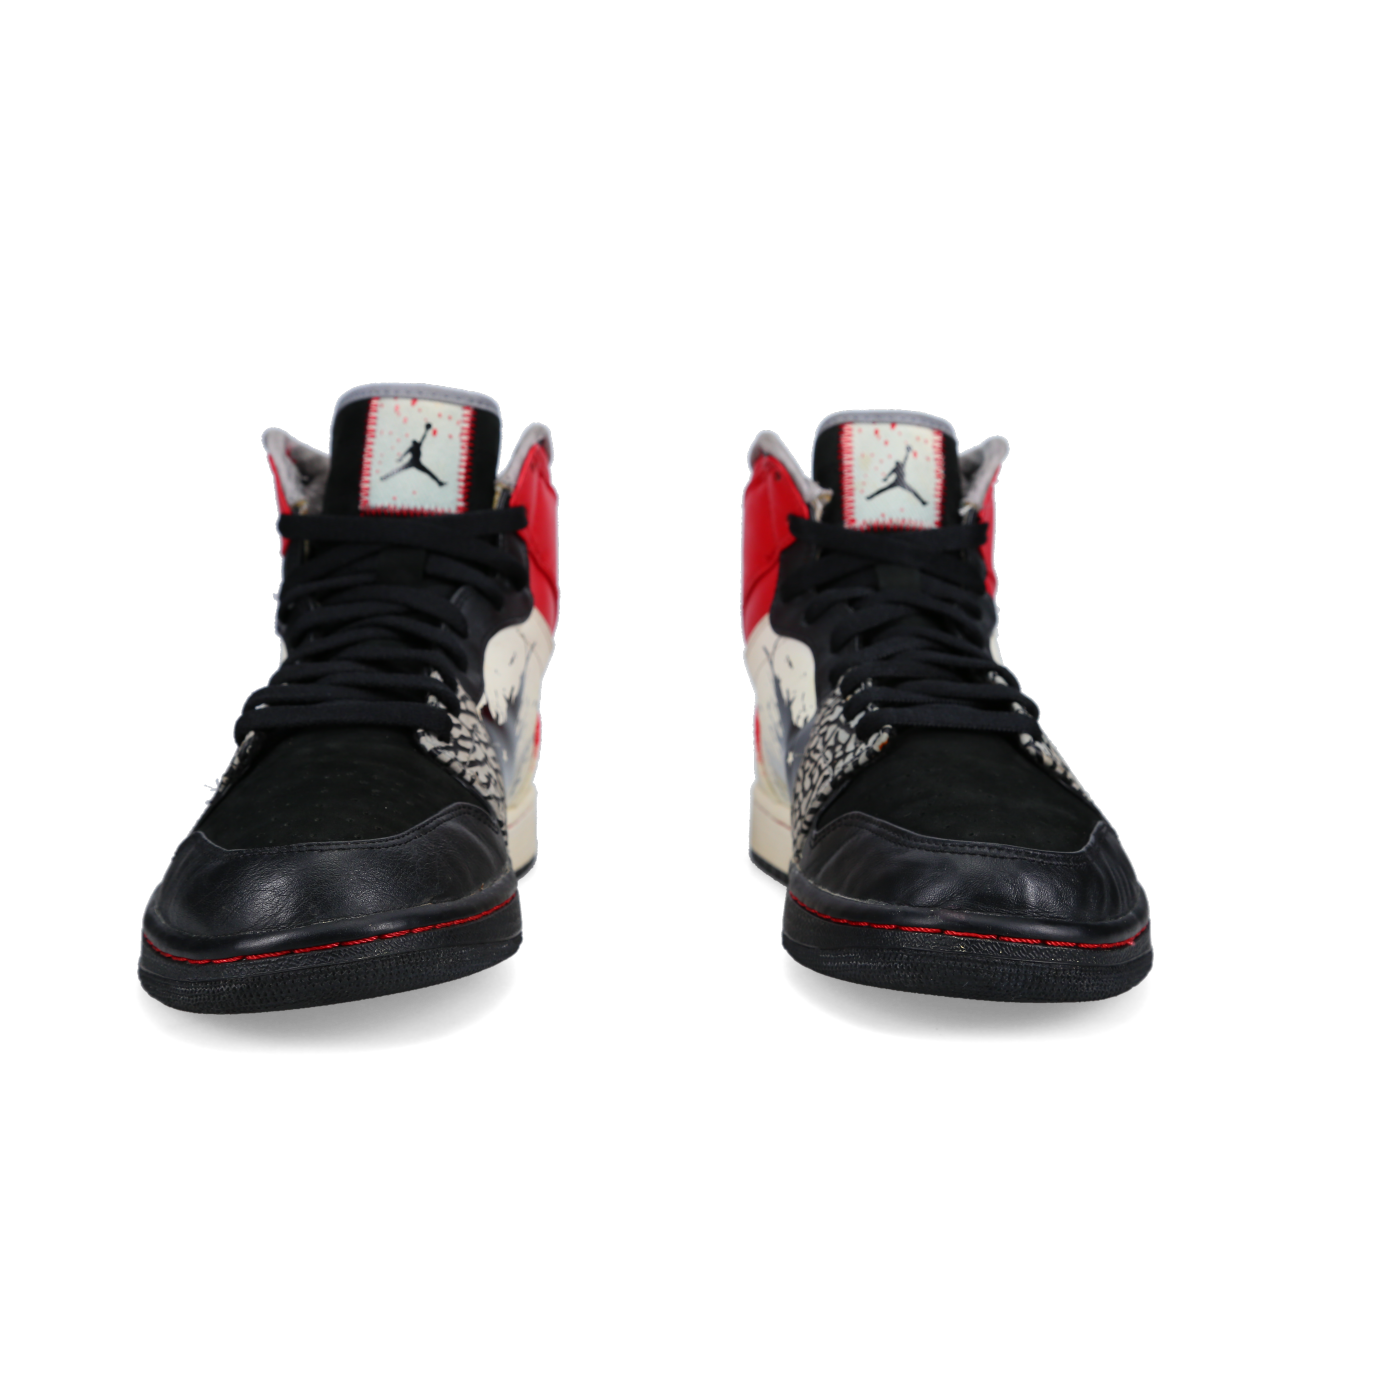 Dave White X Jordan 1 Retro High 'Wings Of The Future' - Back View